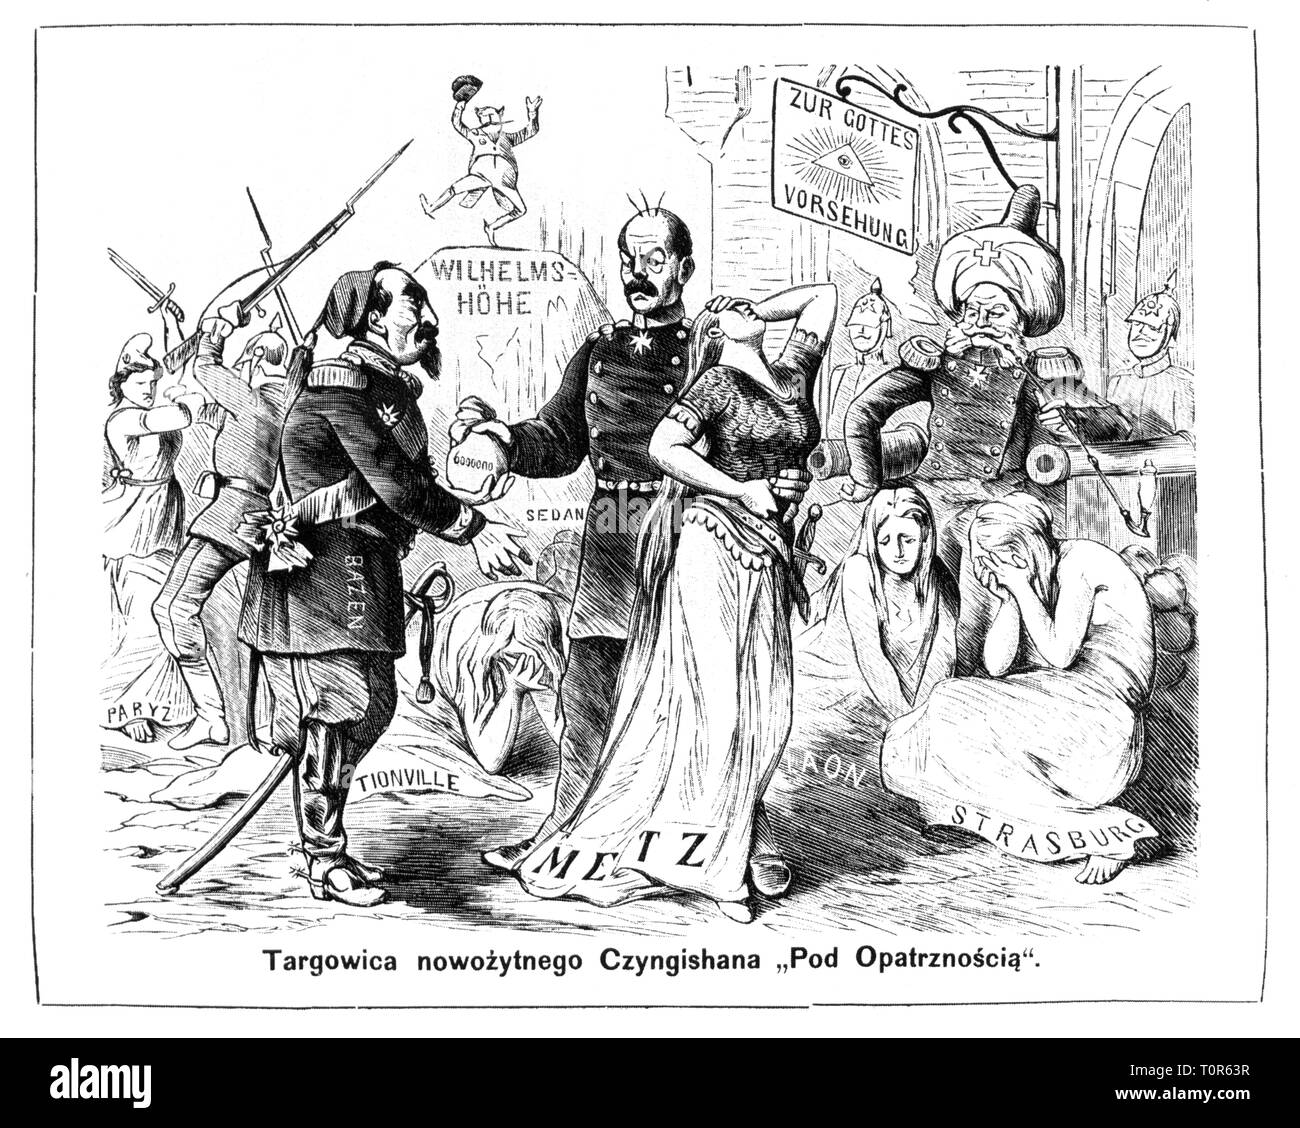 Franco-Prussian War 1870 - 1871, caricature, Otto von Bismarck is paying marshal Francois-Achille Bazaine for the surrender of Metz to the harem of Sultan William, 'Targowice of the modern Genghis Khan 'To the Providence', drawing, 'Djabel', Krakow, 7.11.1870, satire, caricature, caricatures, cartoon, cartoons, Polish press, Poland, Galicia, Austria, German - French, Germany, people, France, William I, king of Prussia, Napoleon III in exile, French Army of the Rhine, capitulation, Strasbourg, Laon, harem Ladies, money, bribery, graft, briberies, , Additional-Rights-Clearance-Info-Not-Available Stock Photo